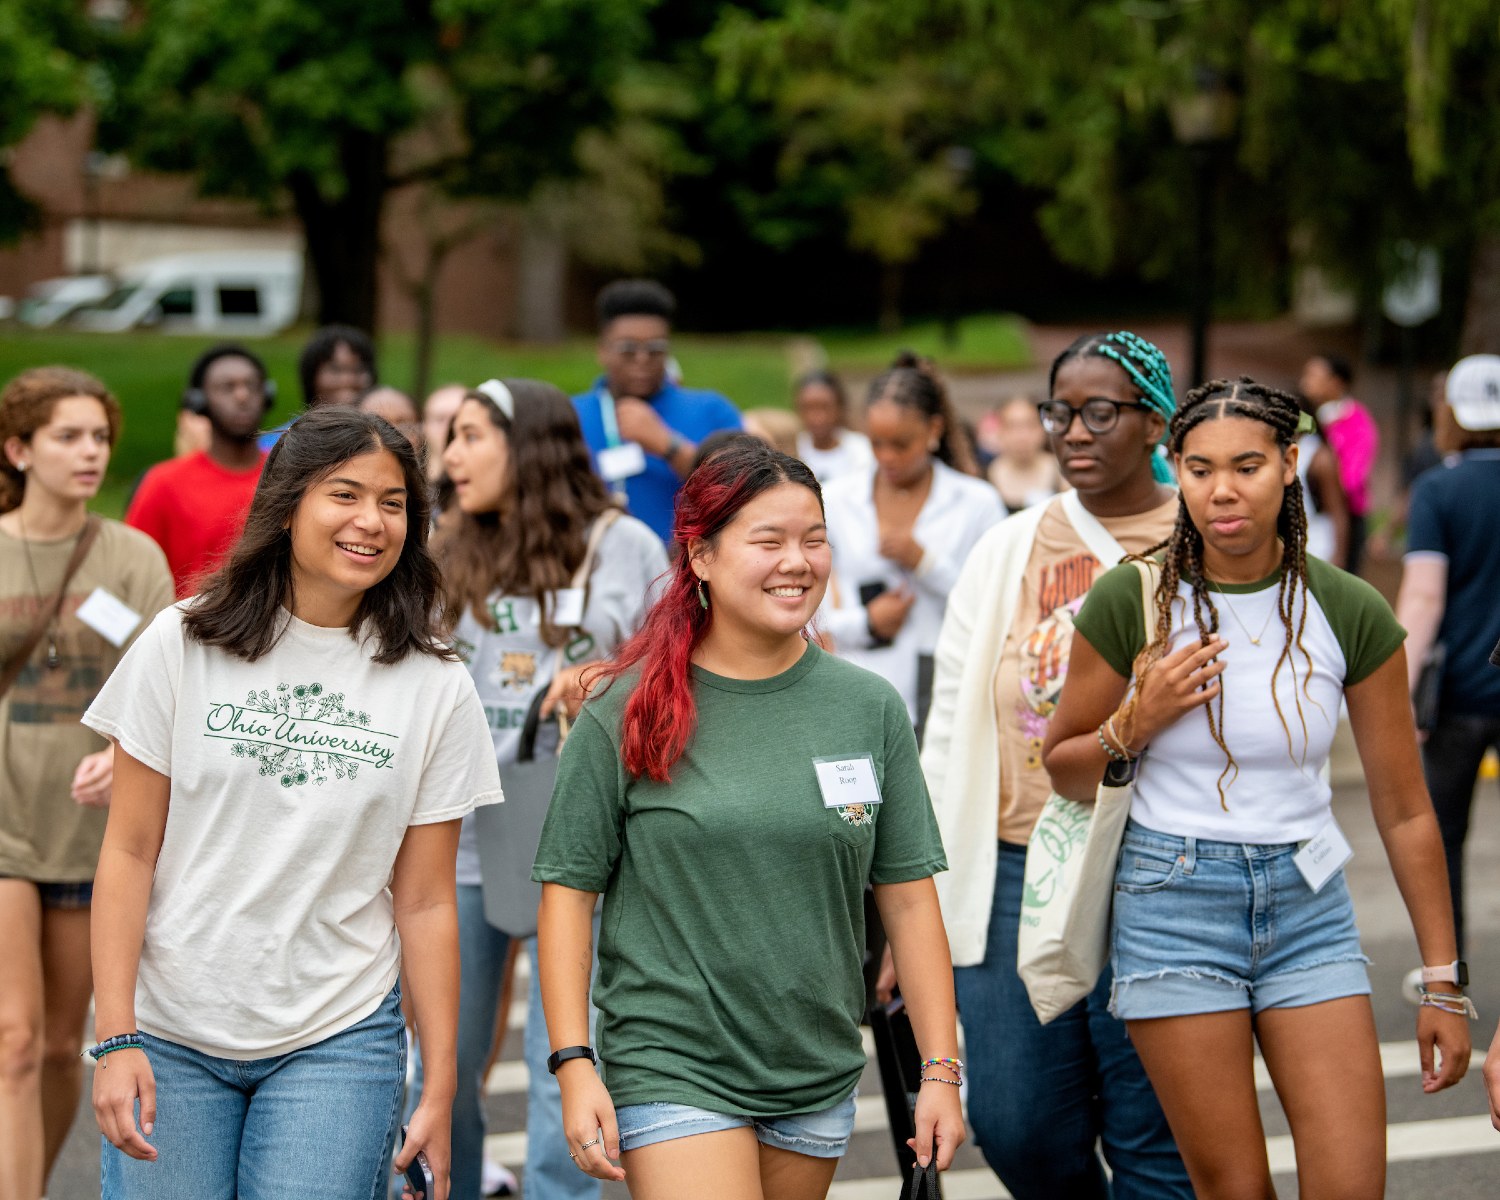 Students walking together during welcome program activity